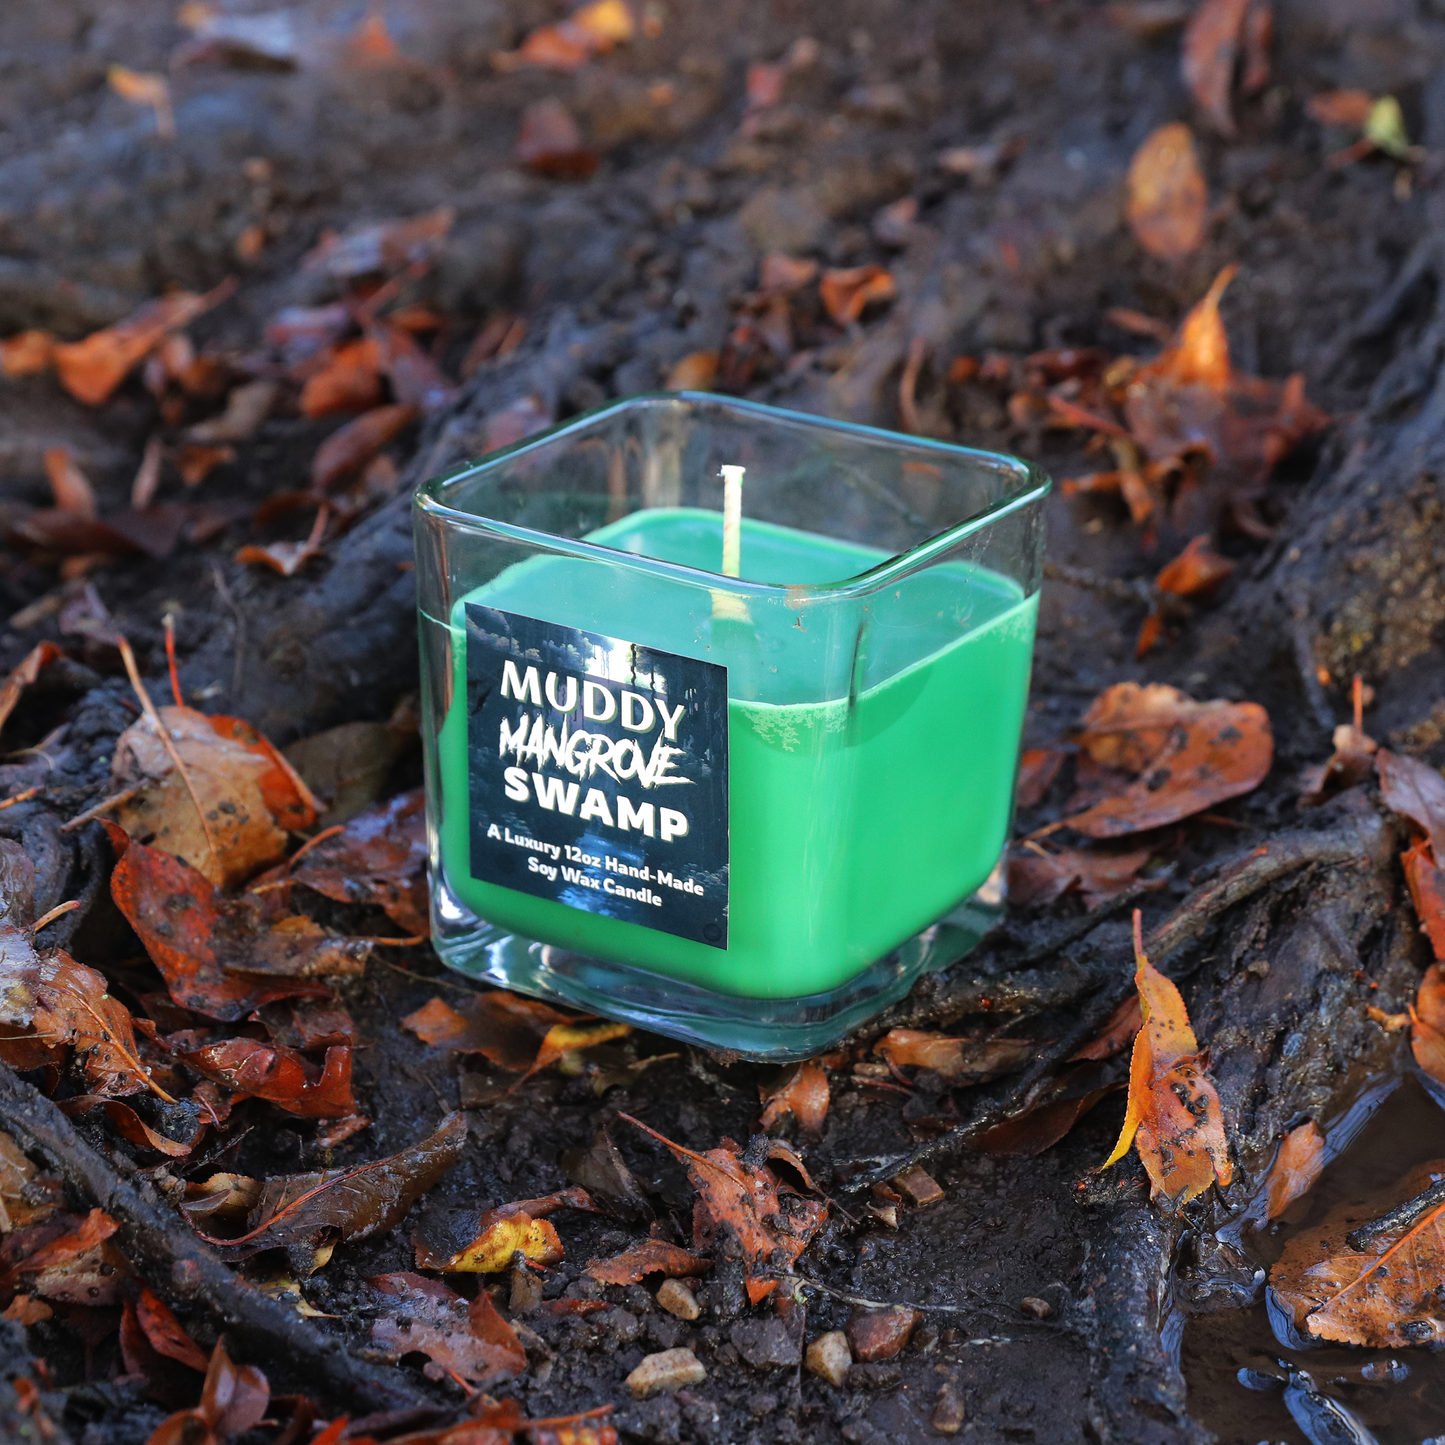 Muddy Mangrove Swamp | A Minecraft-Inspired Gaming Candle